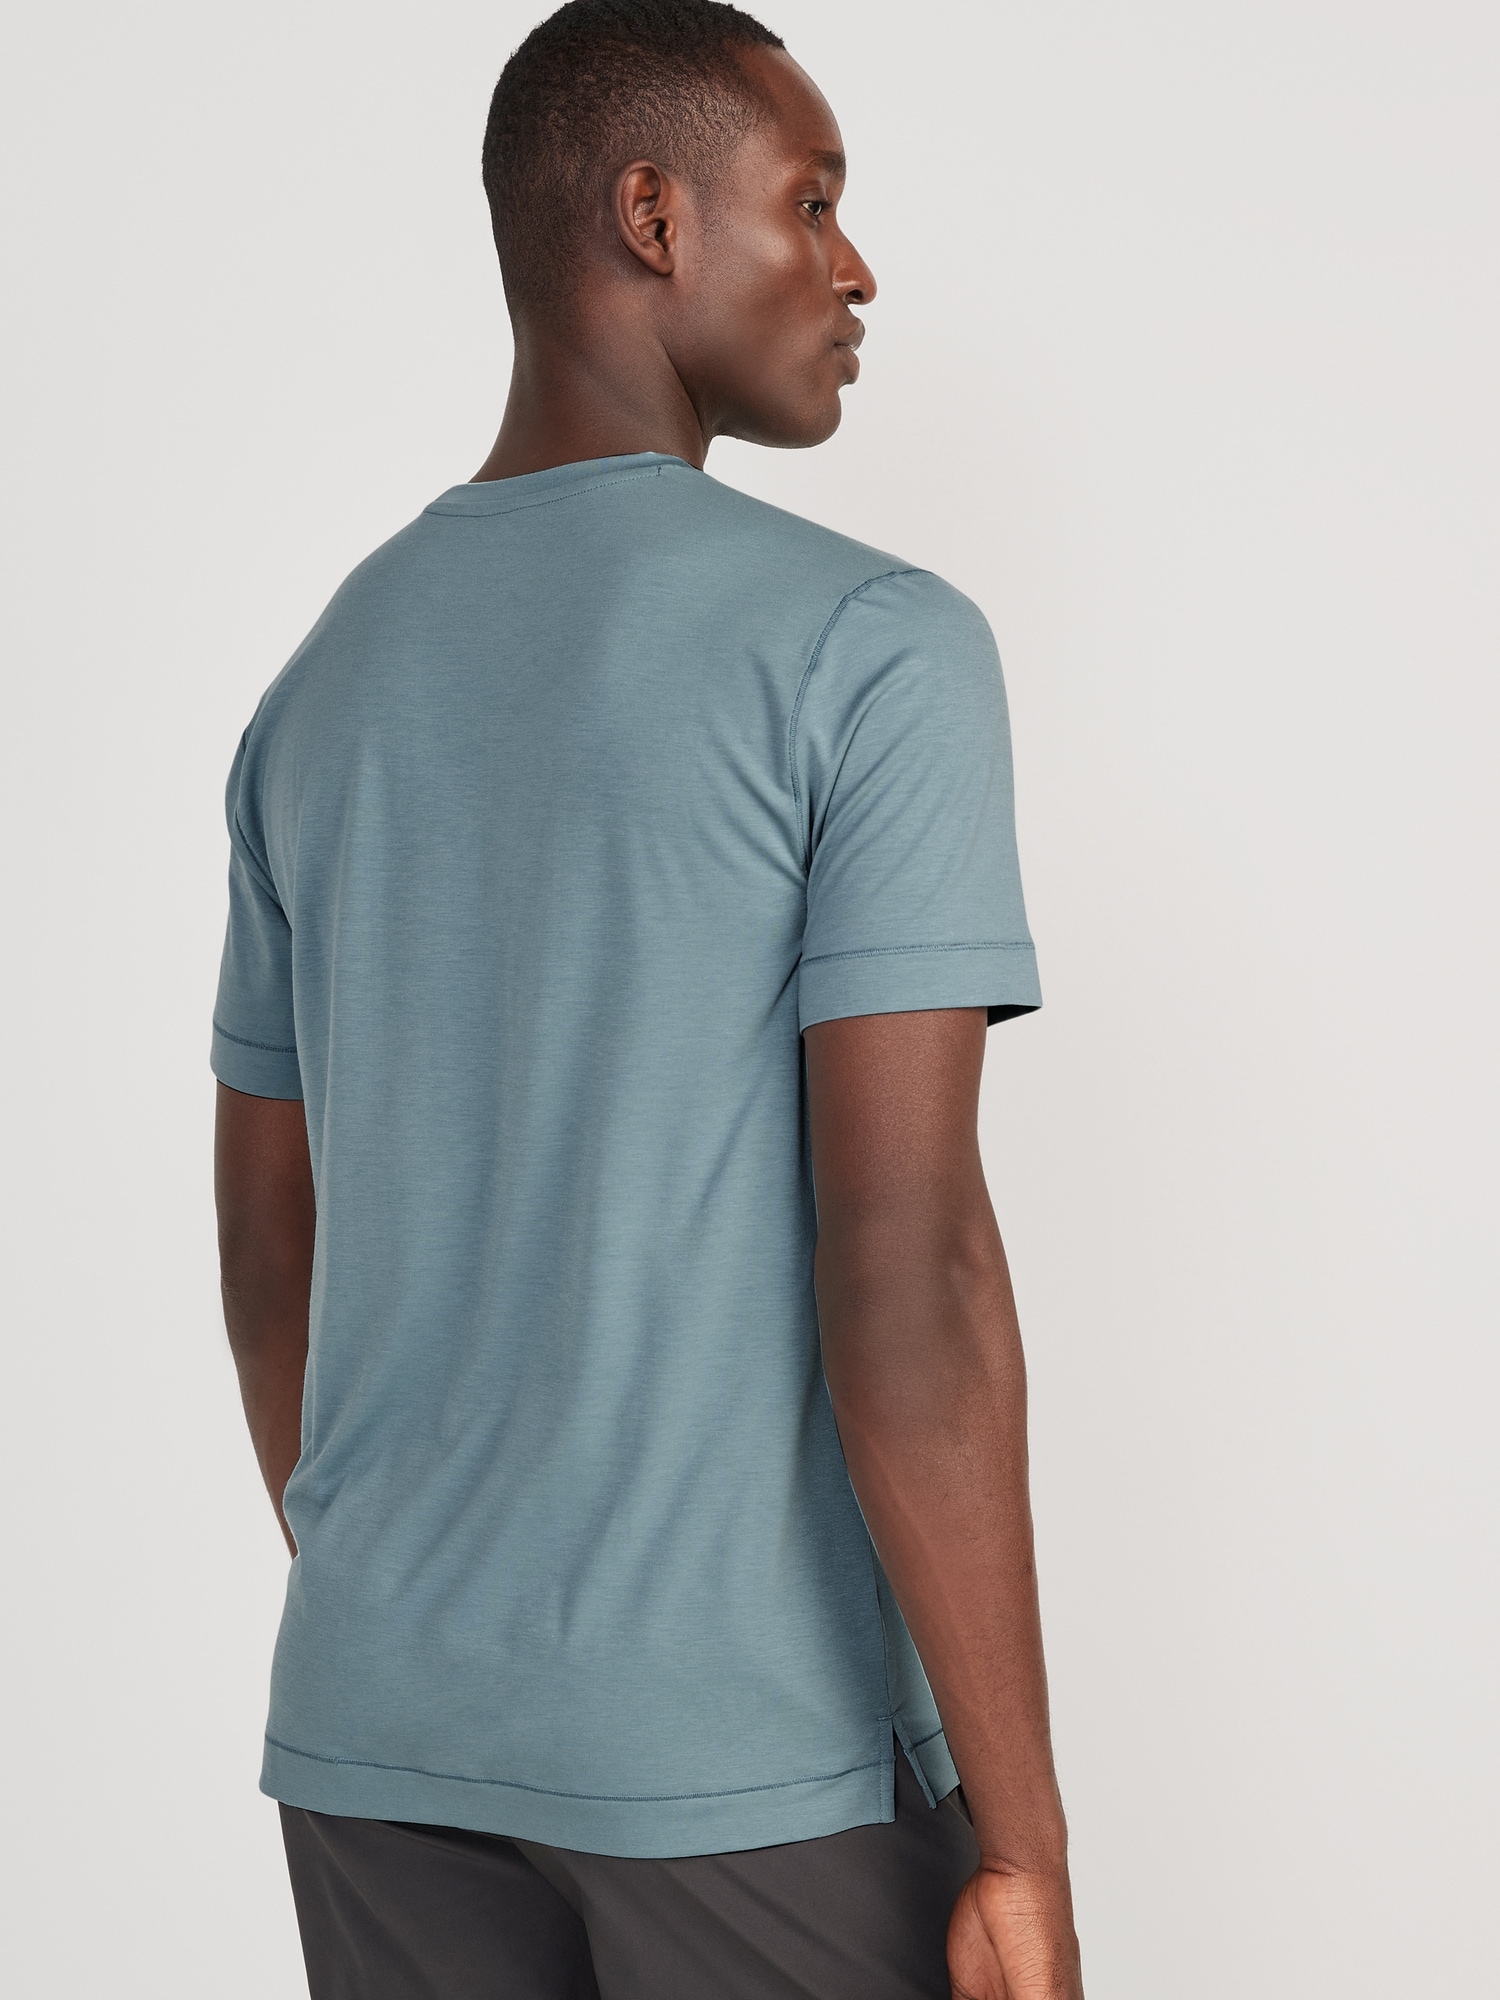 Beyond 4-Way Stretch T-Shirt for Men | Old Navy